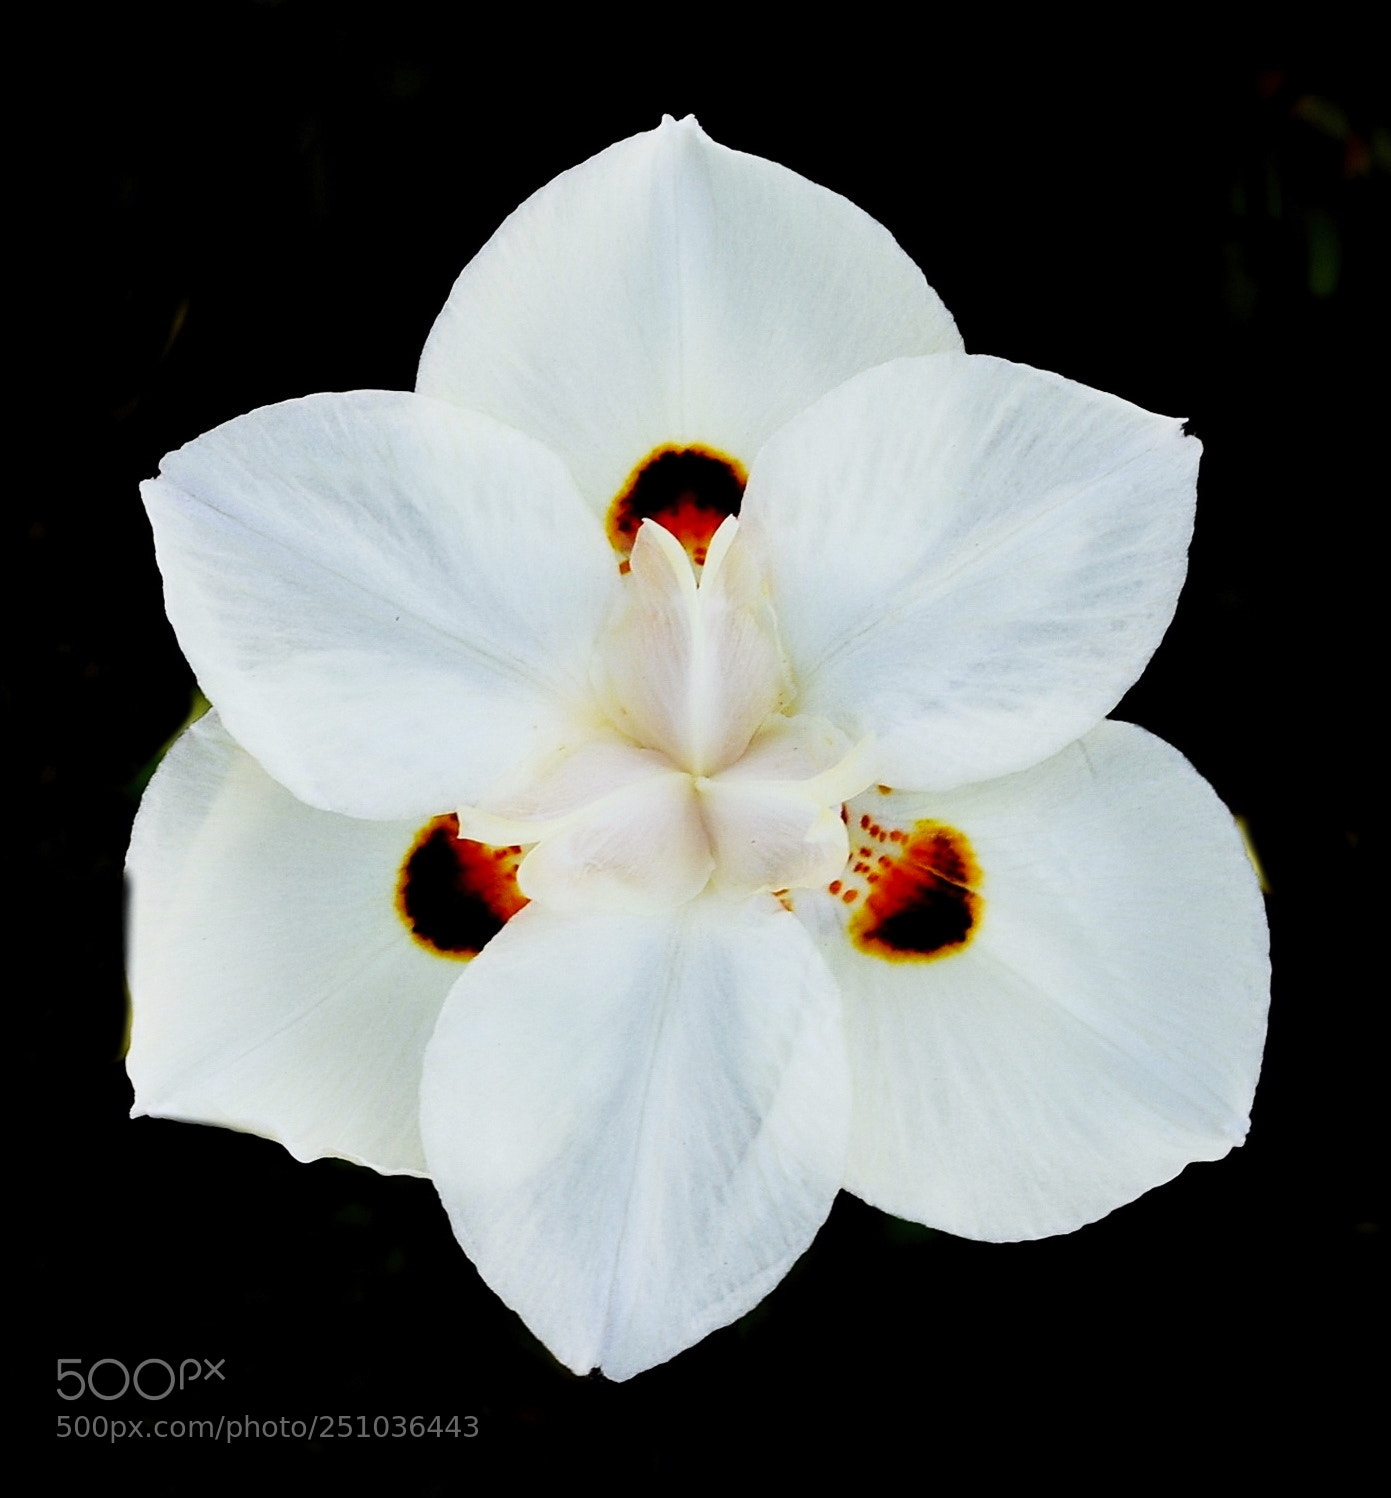 Nikon D7200 sample photo. A white spotted flower photography